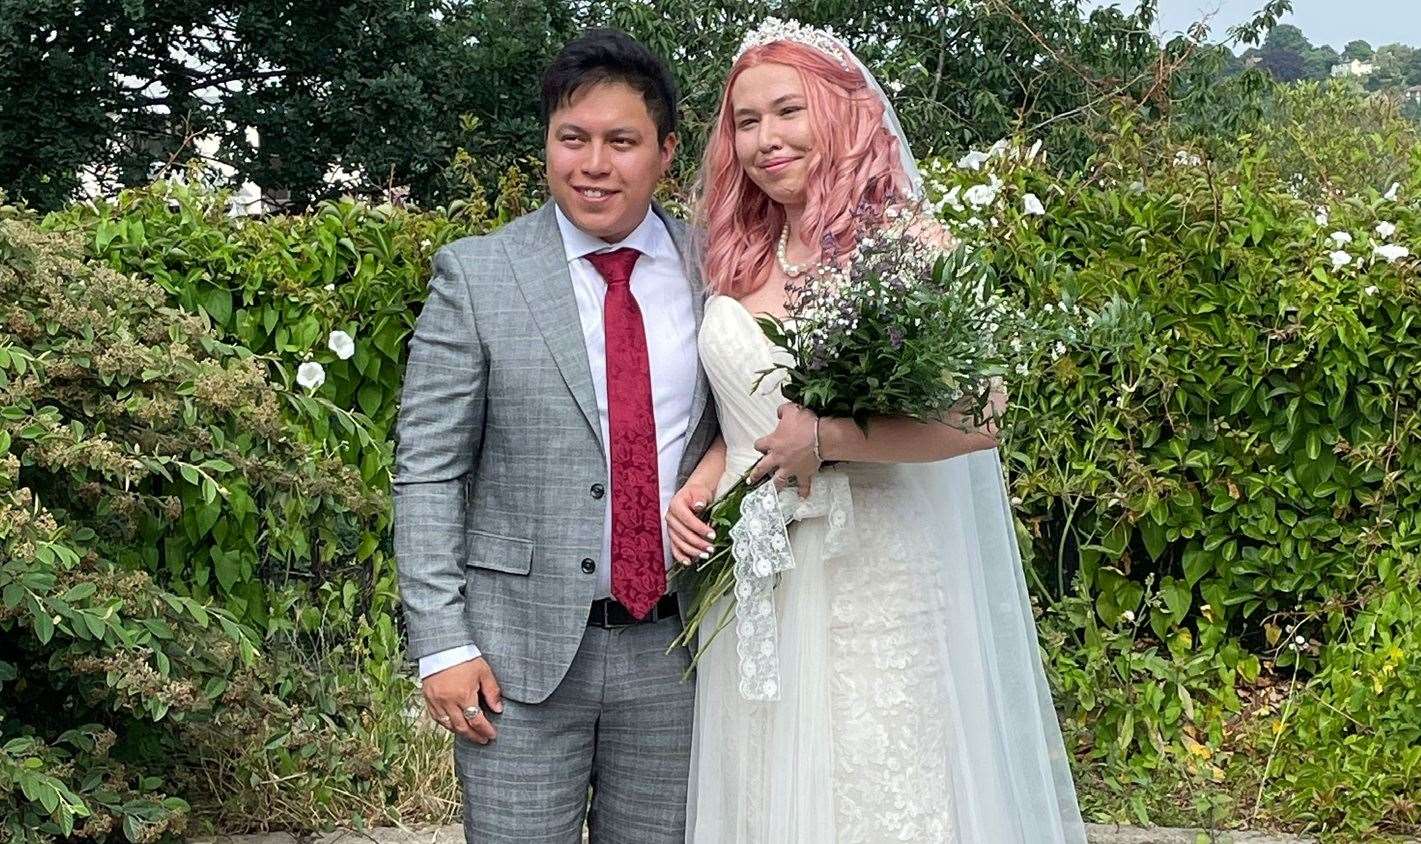 Aaron and Chanice Maullin only tied the knot last month, with Aaron wearing the French Connection suit which has now been stolen from him. Picture: Chanice Maullin